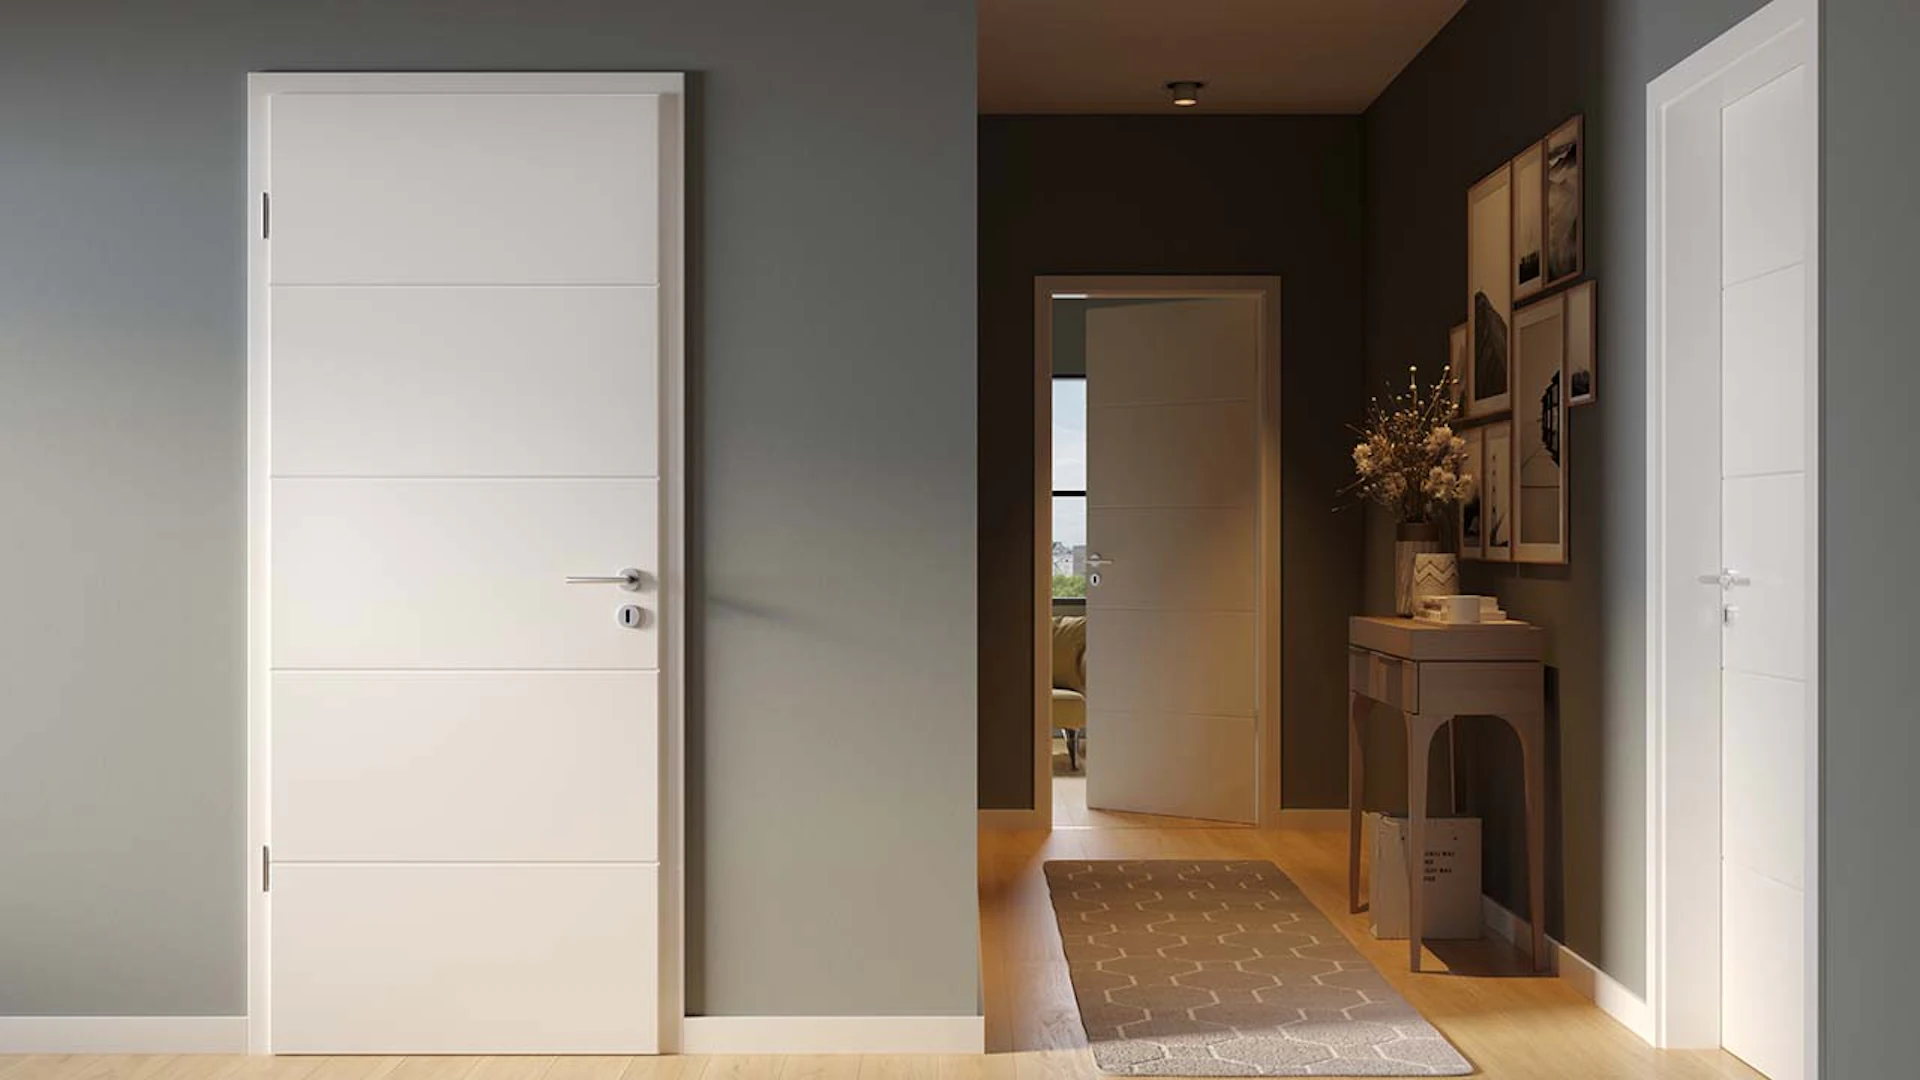 planeo interior door lacquer 2.0 - Kinga 9010 white lacquer 1985 x 860 mm DIN R - round RSP hinge 3-t